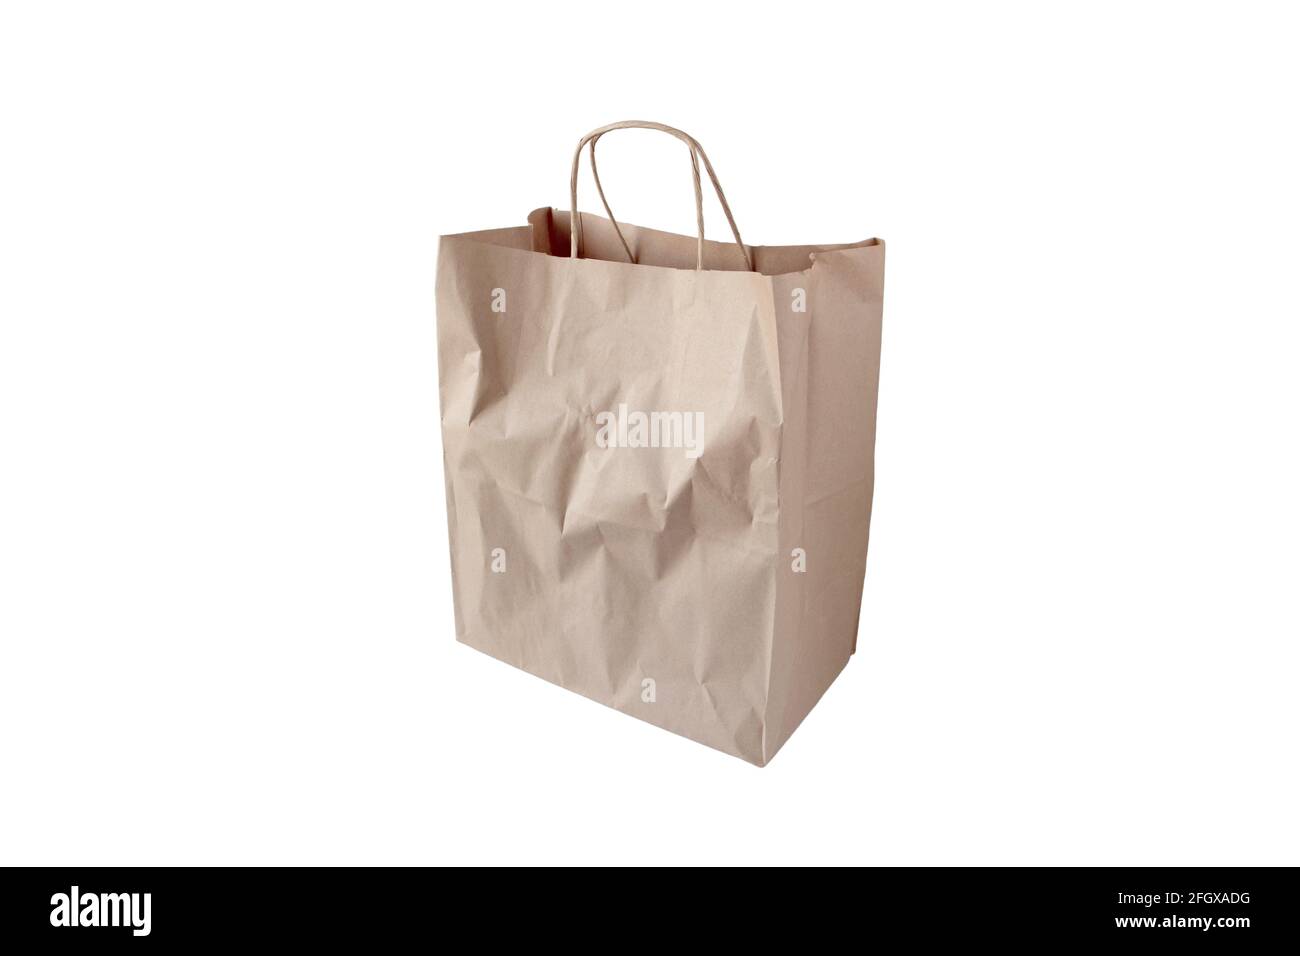 Shopping brown kraft paper bag with handles isolated on white. Stock Photo